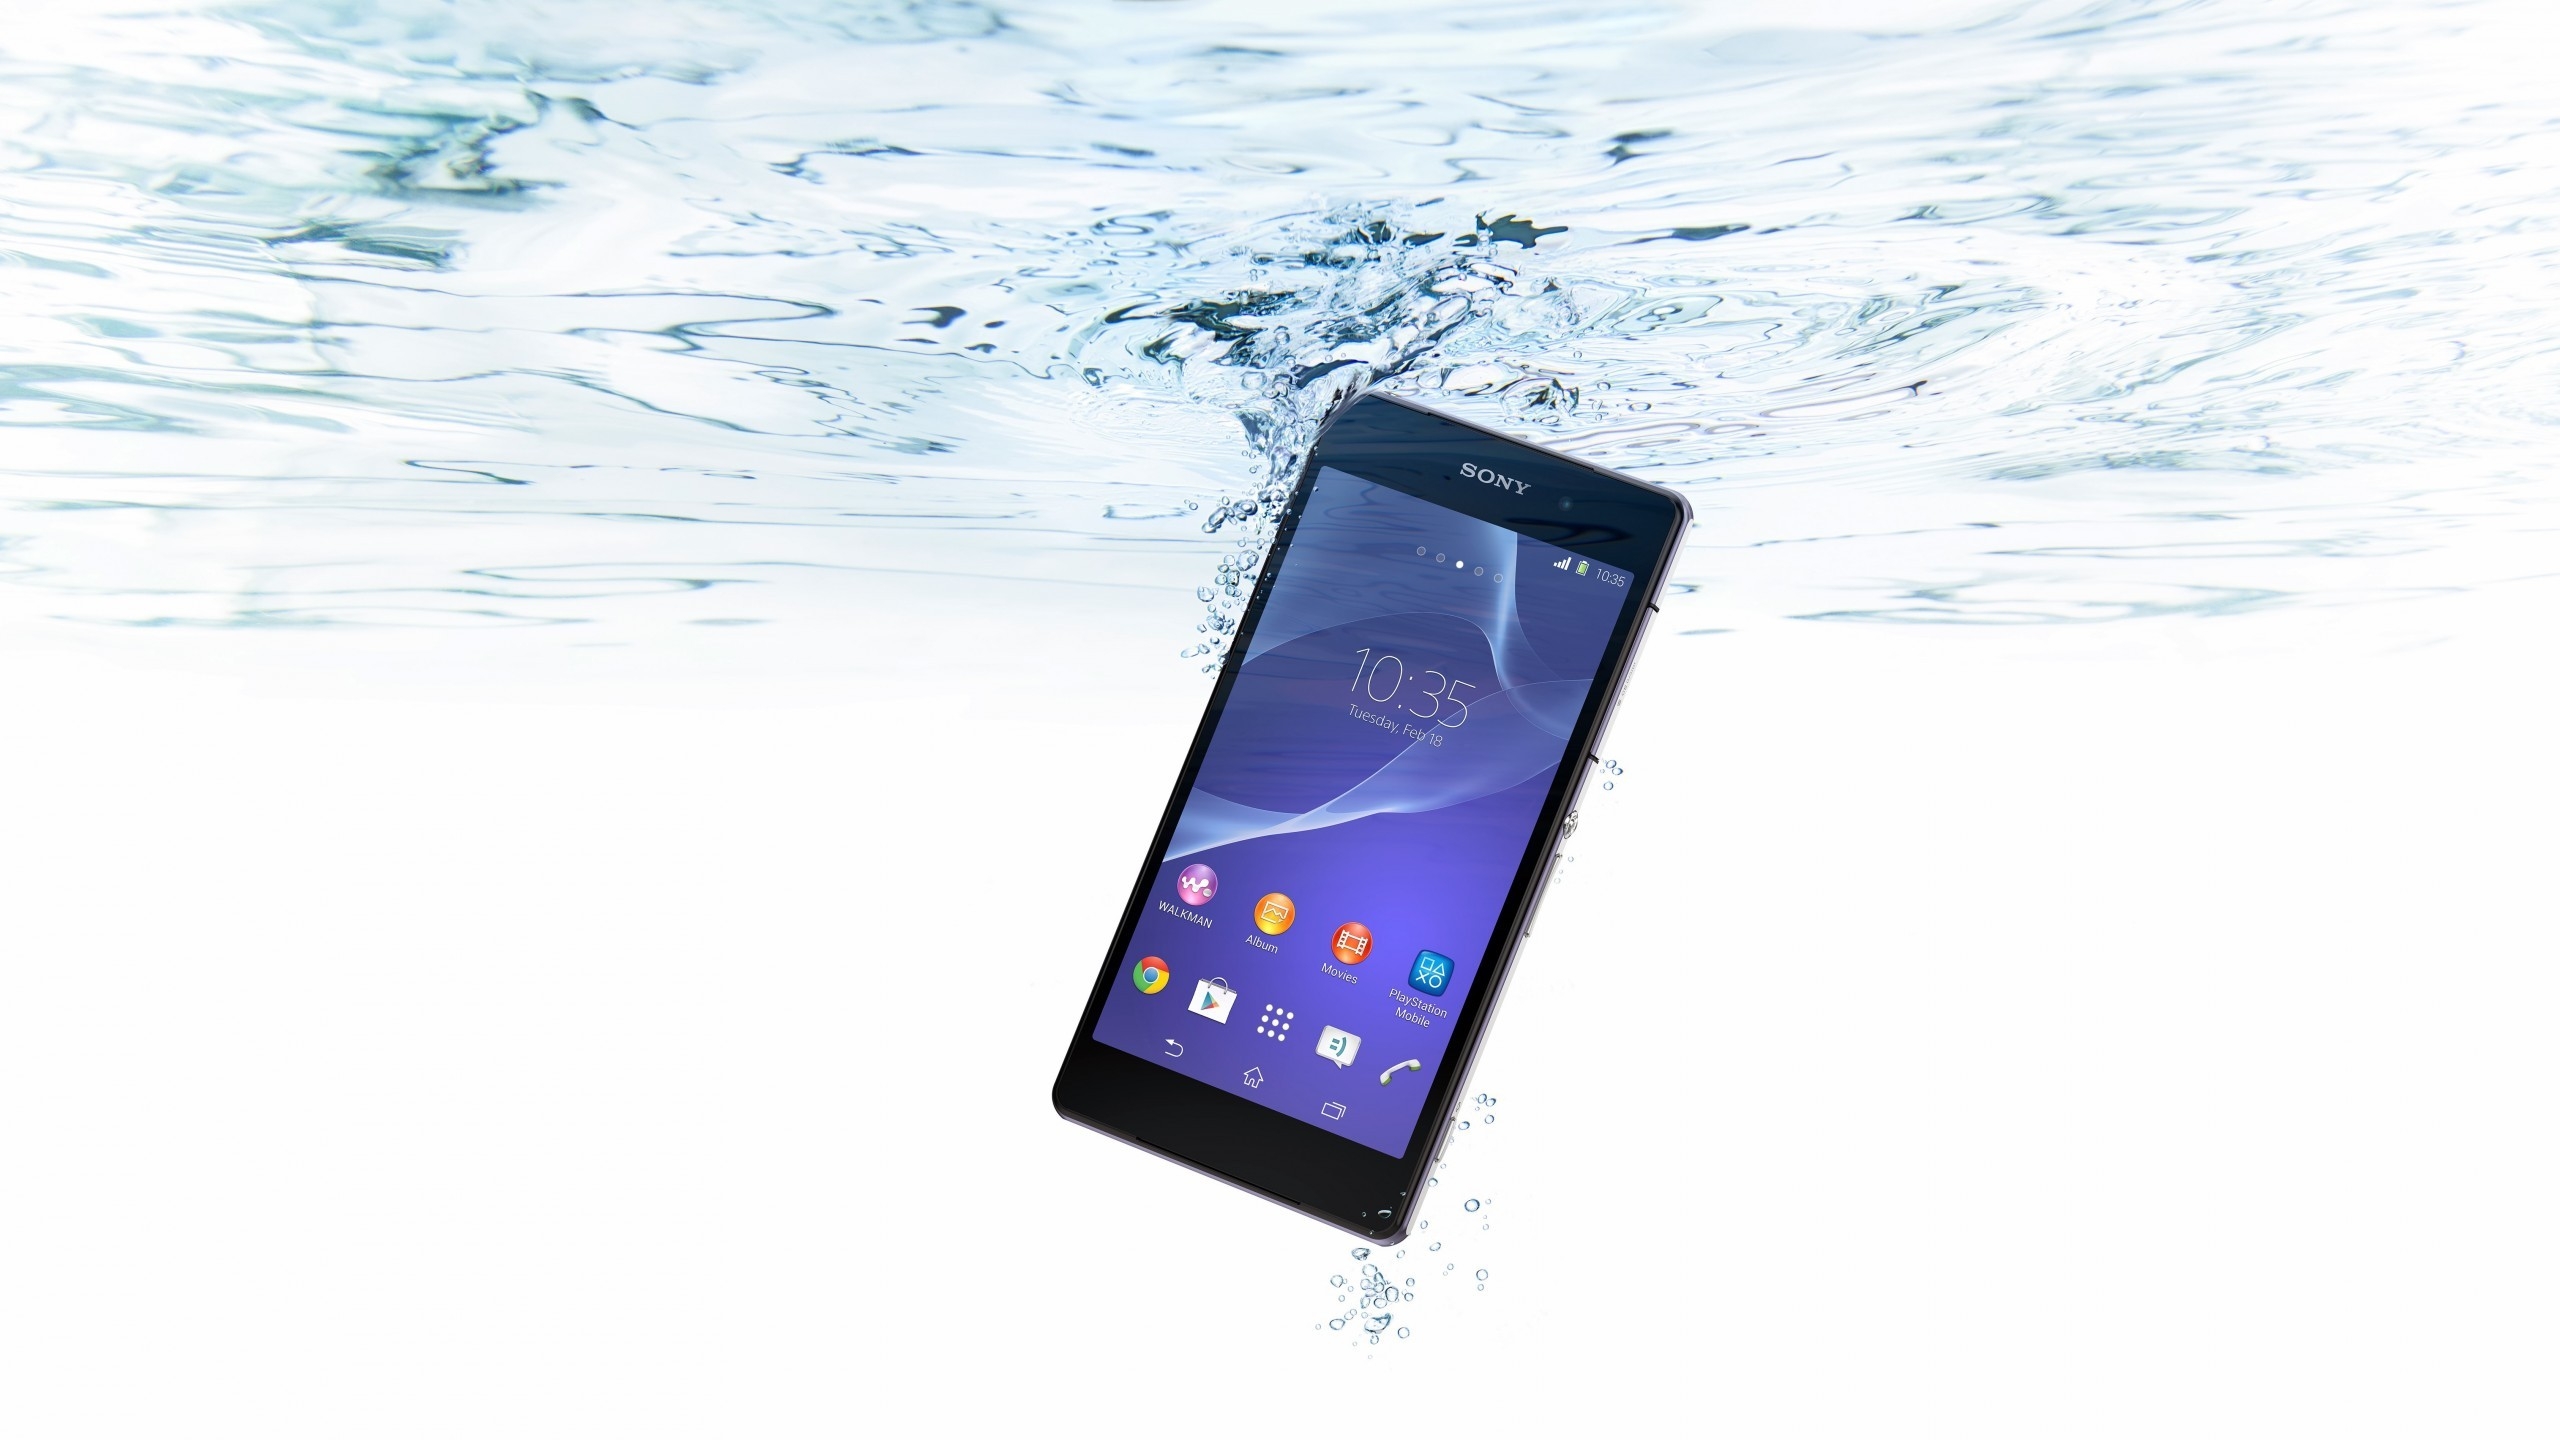 Sony Xperia Z2 Waterproof for 2560x1440 HDTV resolution